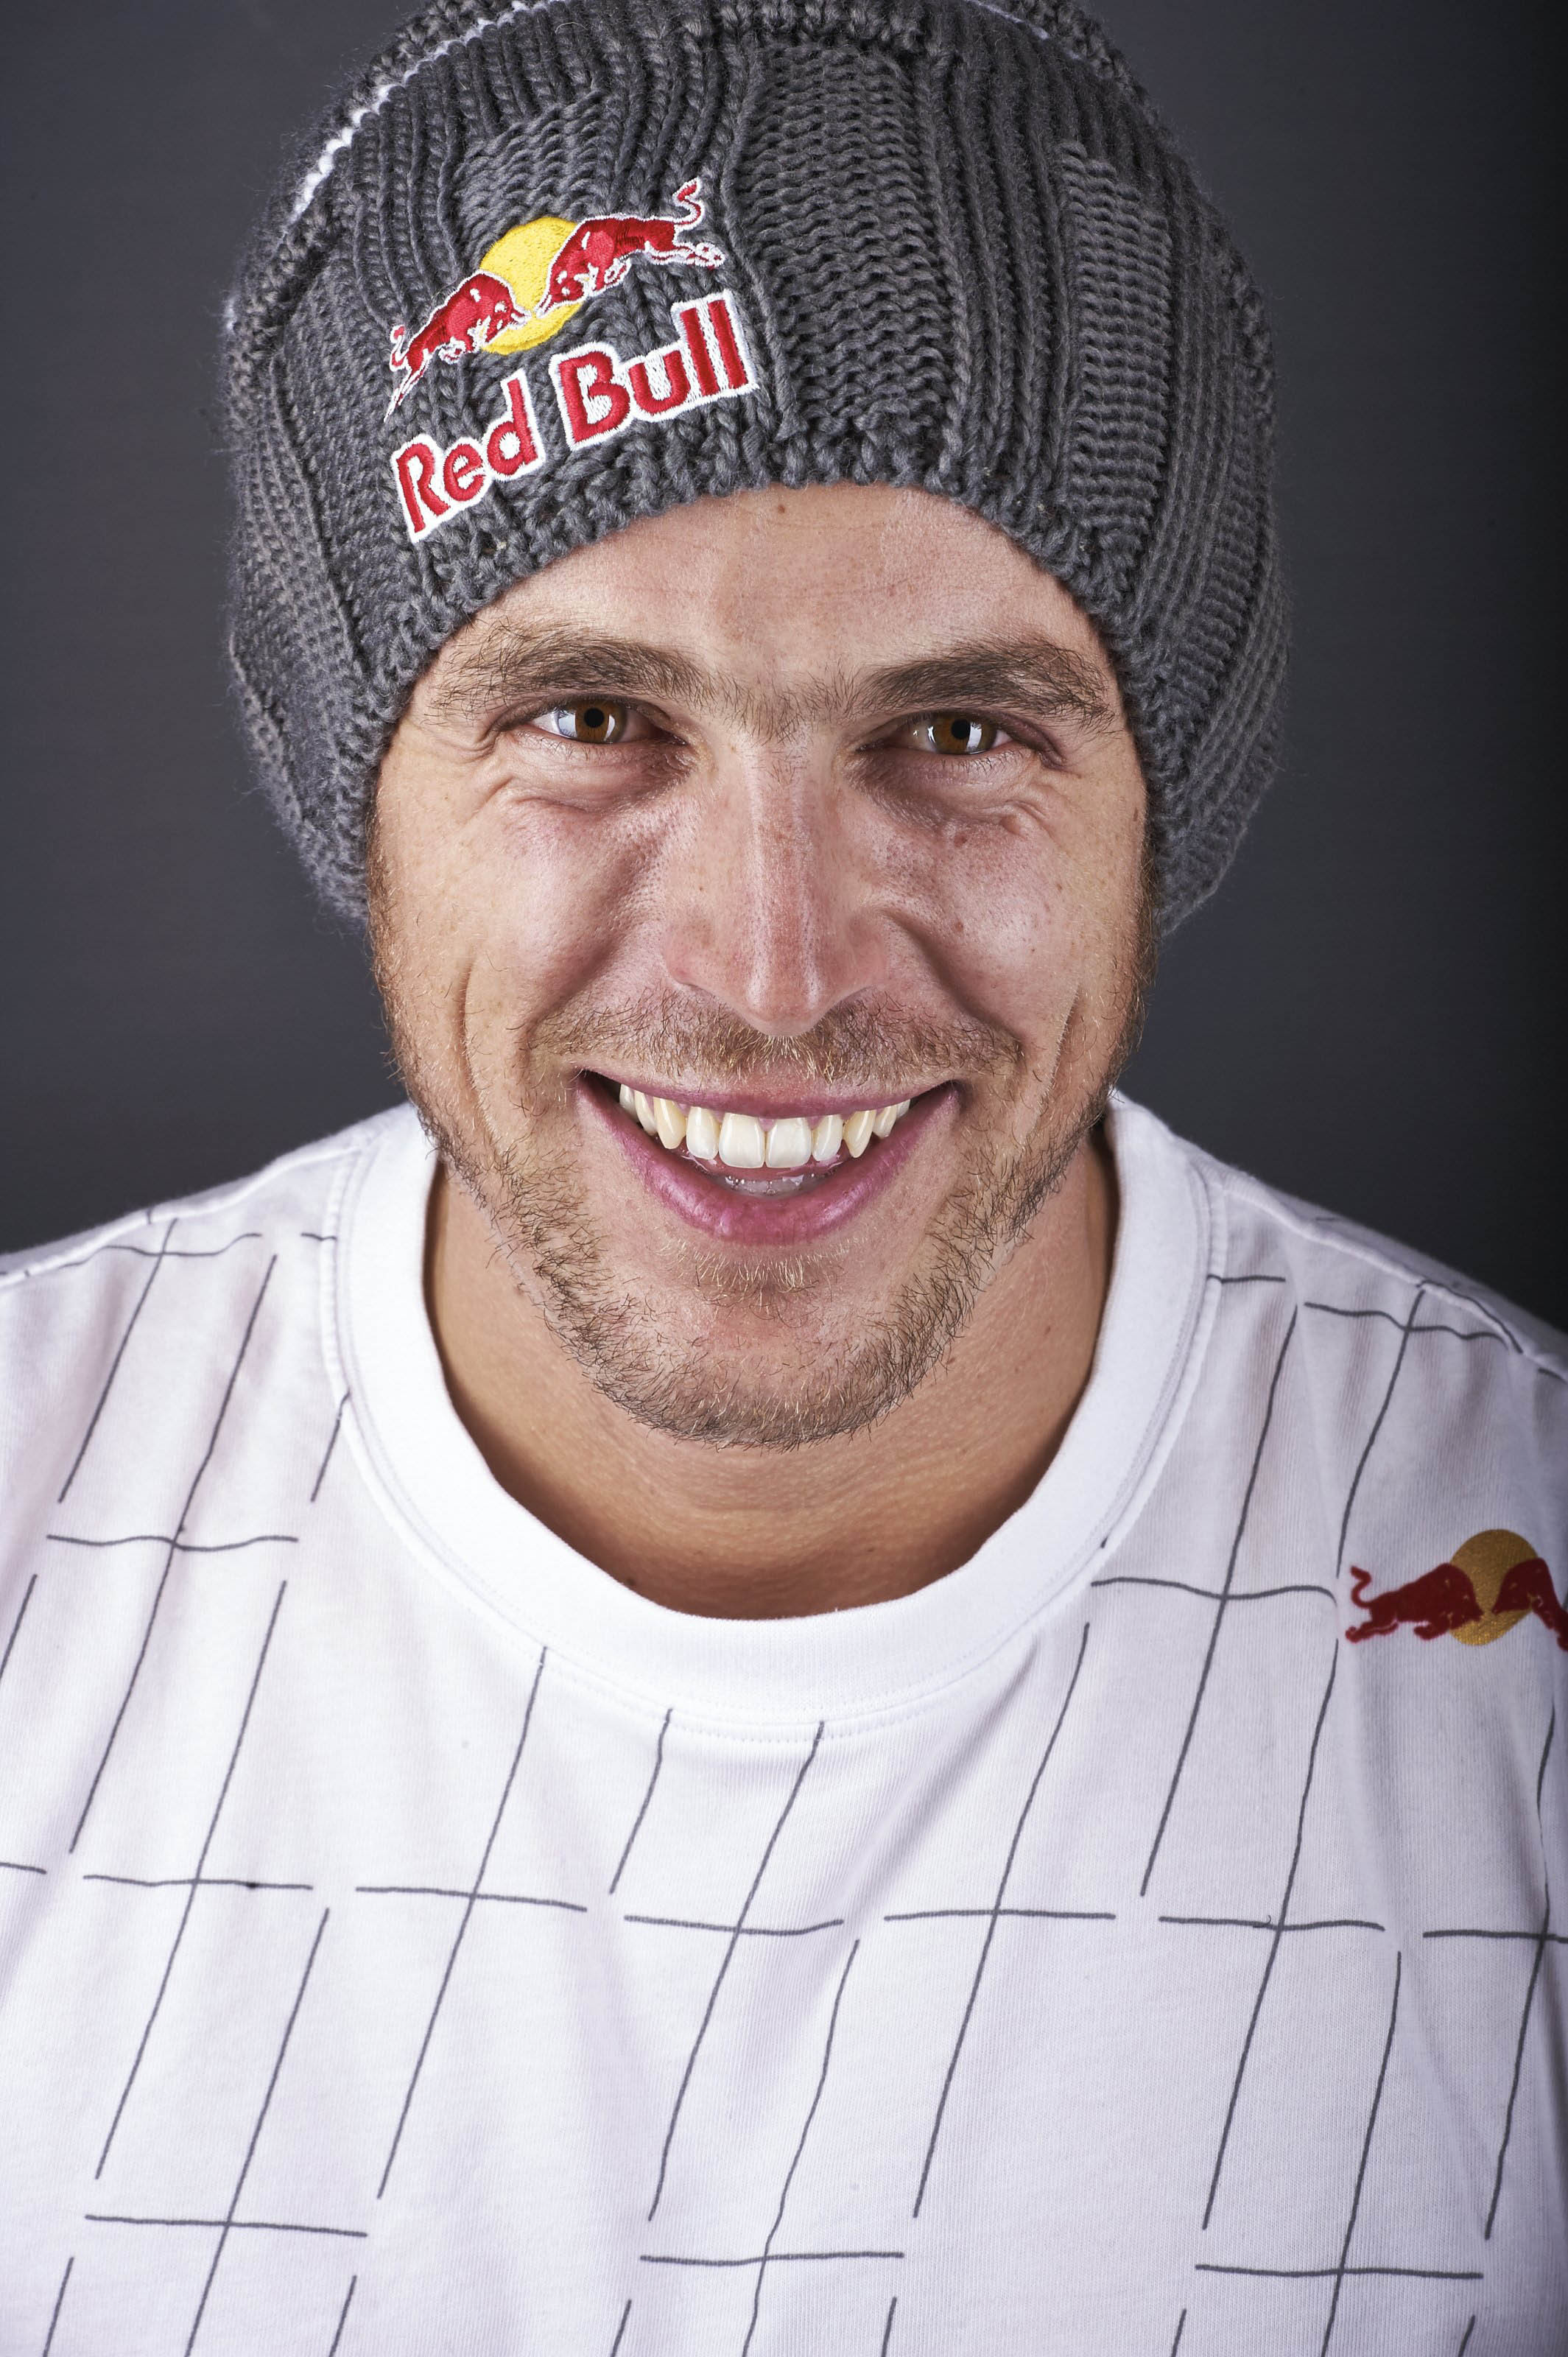 Roland Fischnaller, Captivating images, Snowboarding artistry, Visual storytelling, 2130x3200 HD Handy